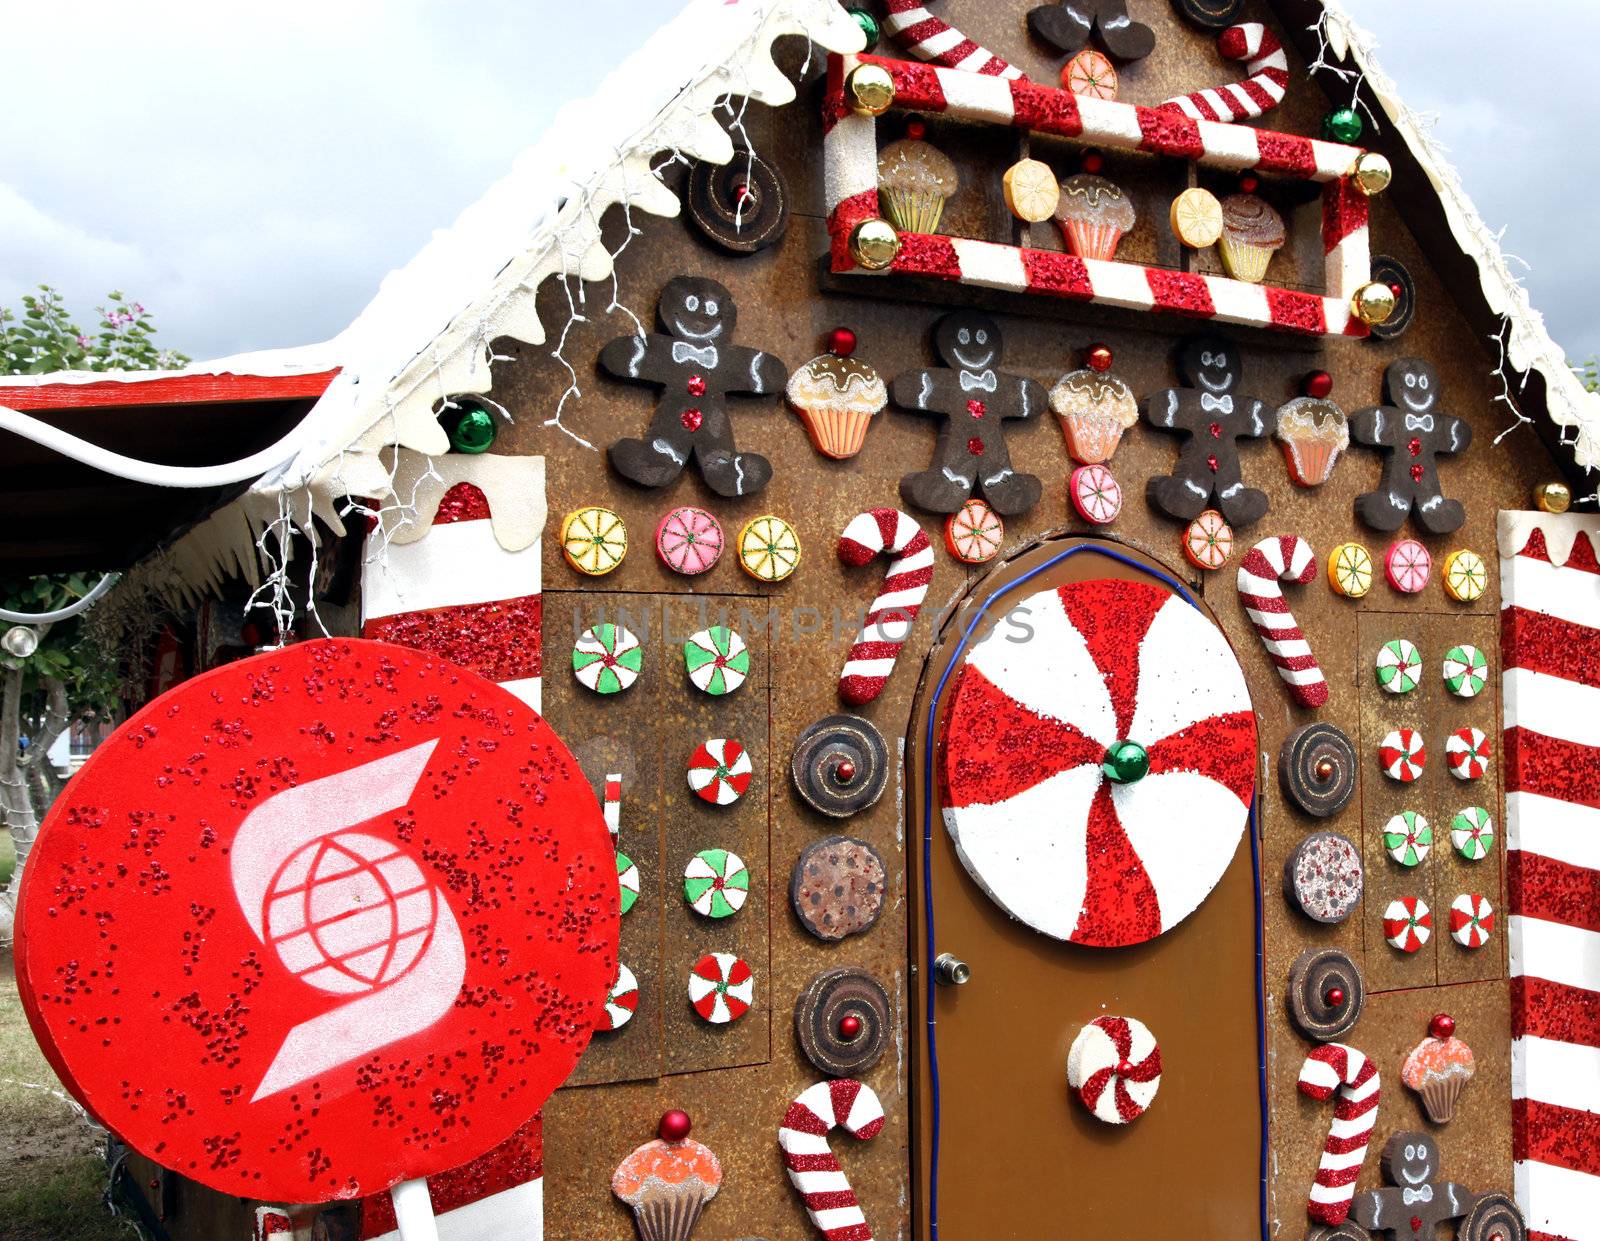 Scotiabank's Gingerbread House located in Emanipation Park in Kingston, Jamaica.